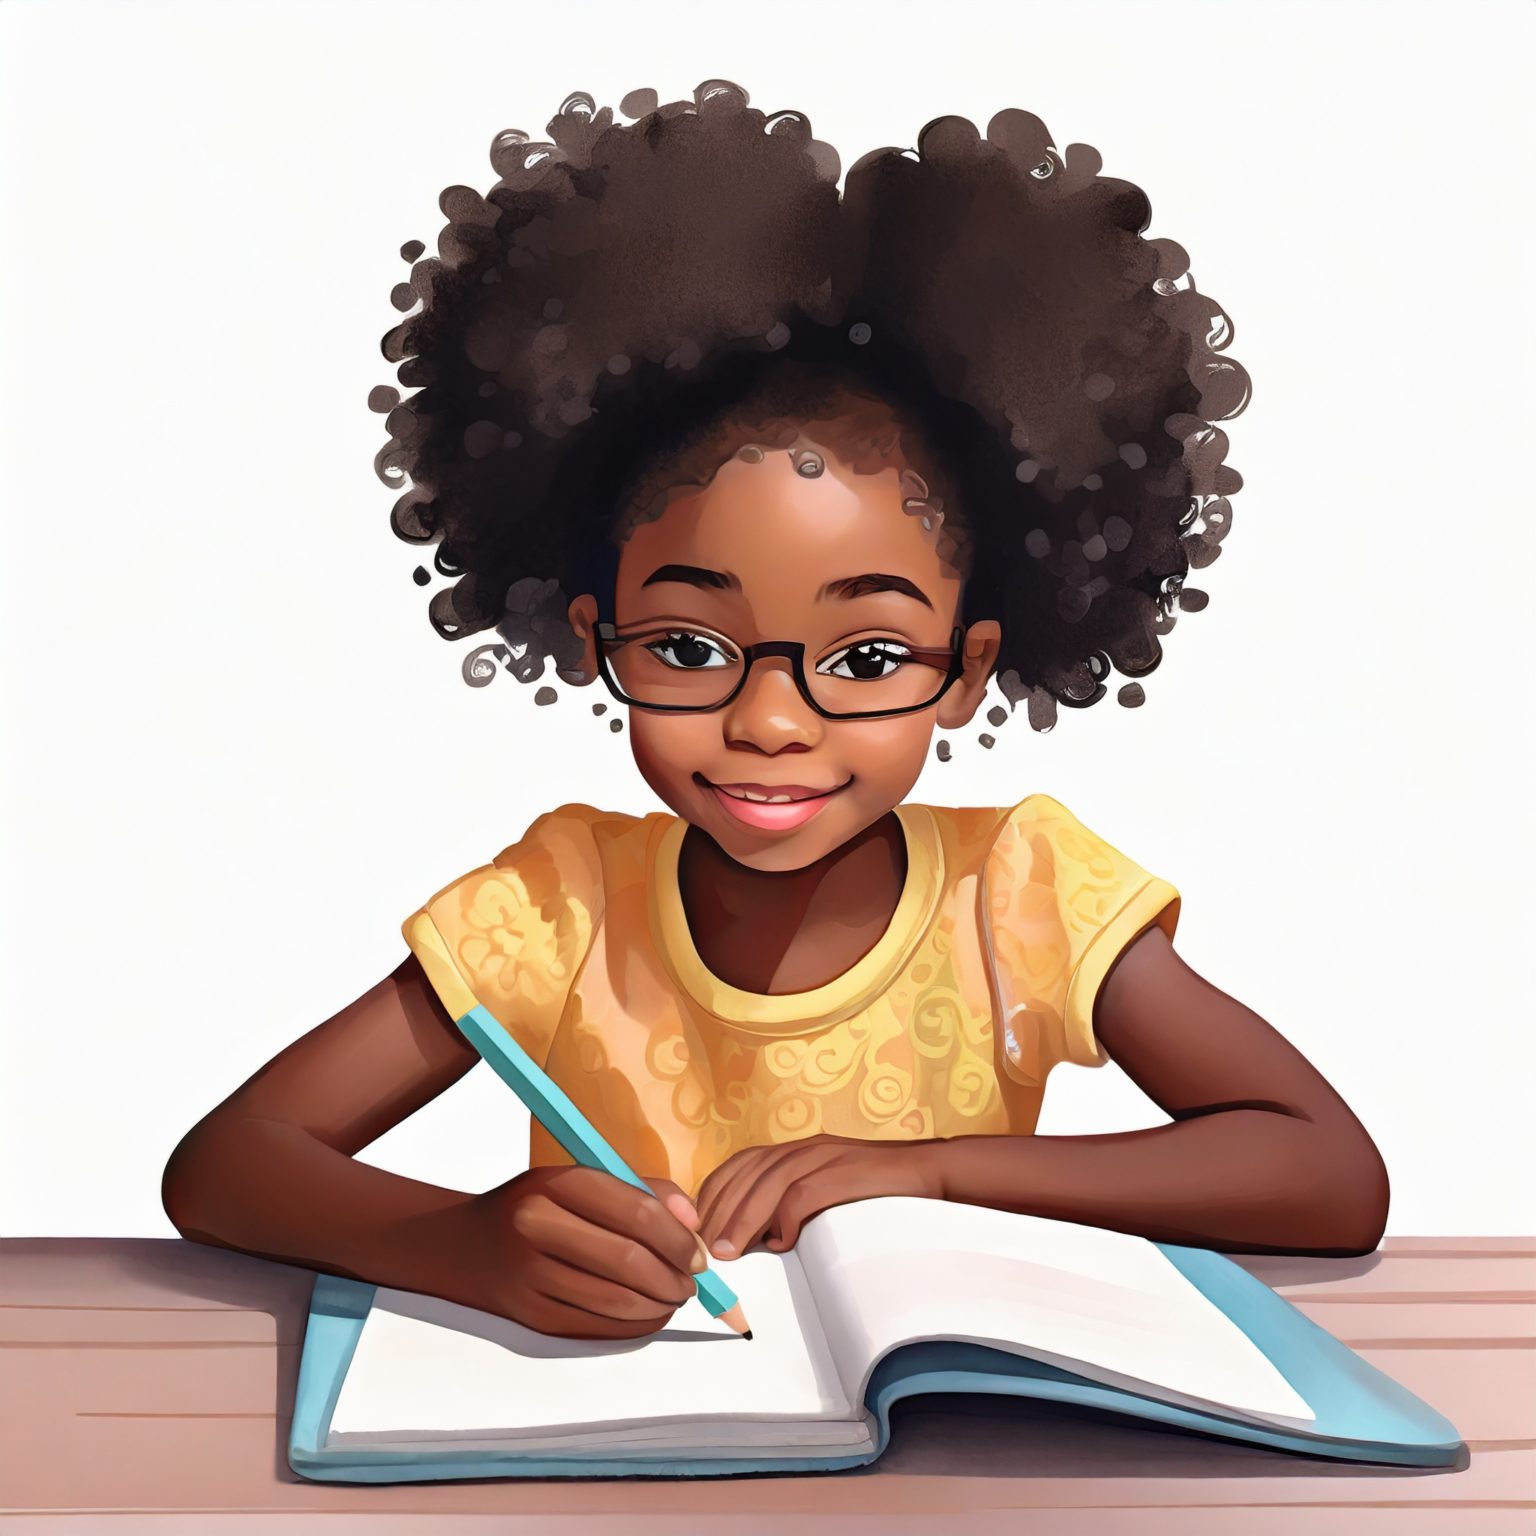 This A.I. generated image depicts a young black girl writing in a notebook. Adobe Firefly was used to create the image.